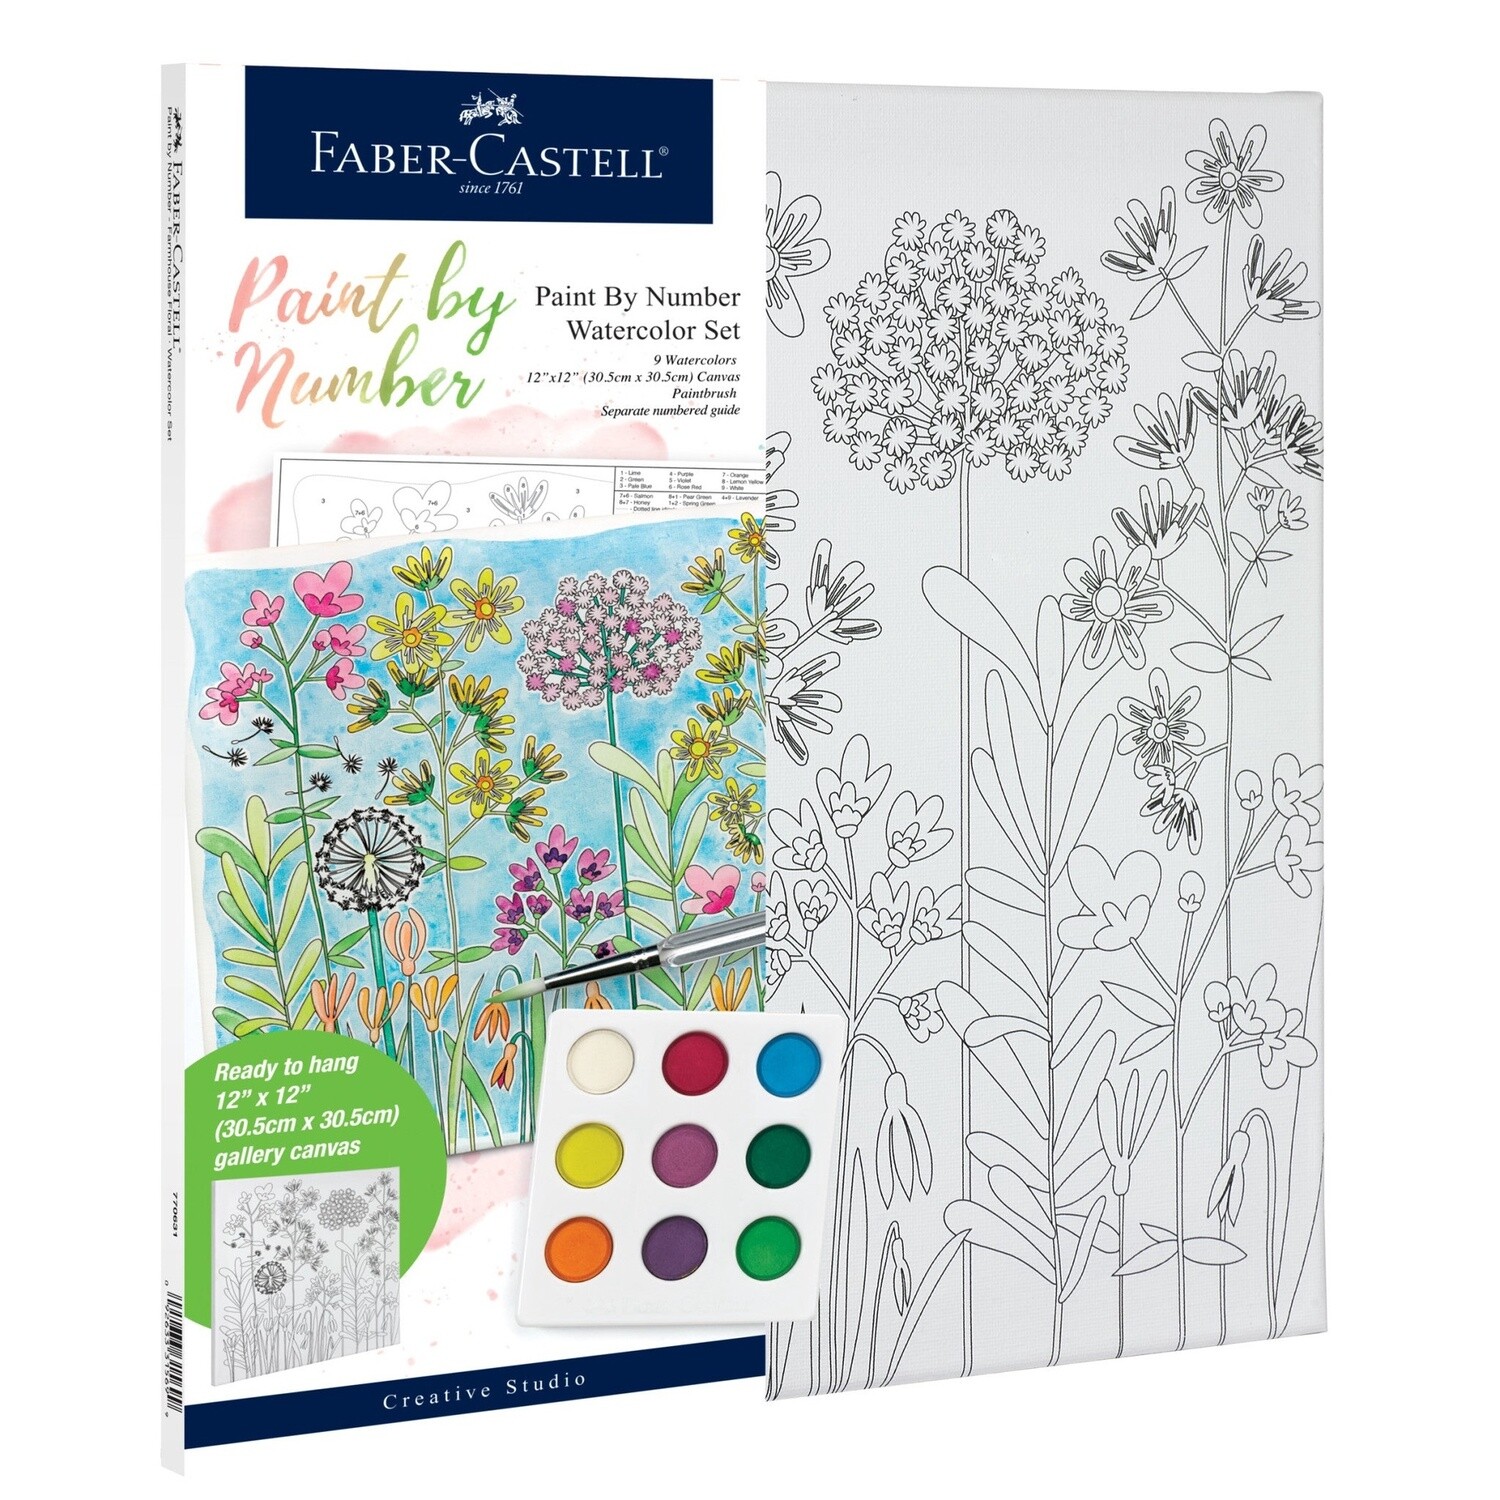 Faber-Castell Watercolor Paint by Number - Farm House